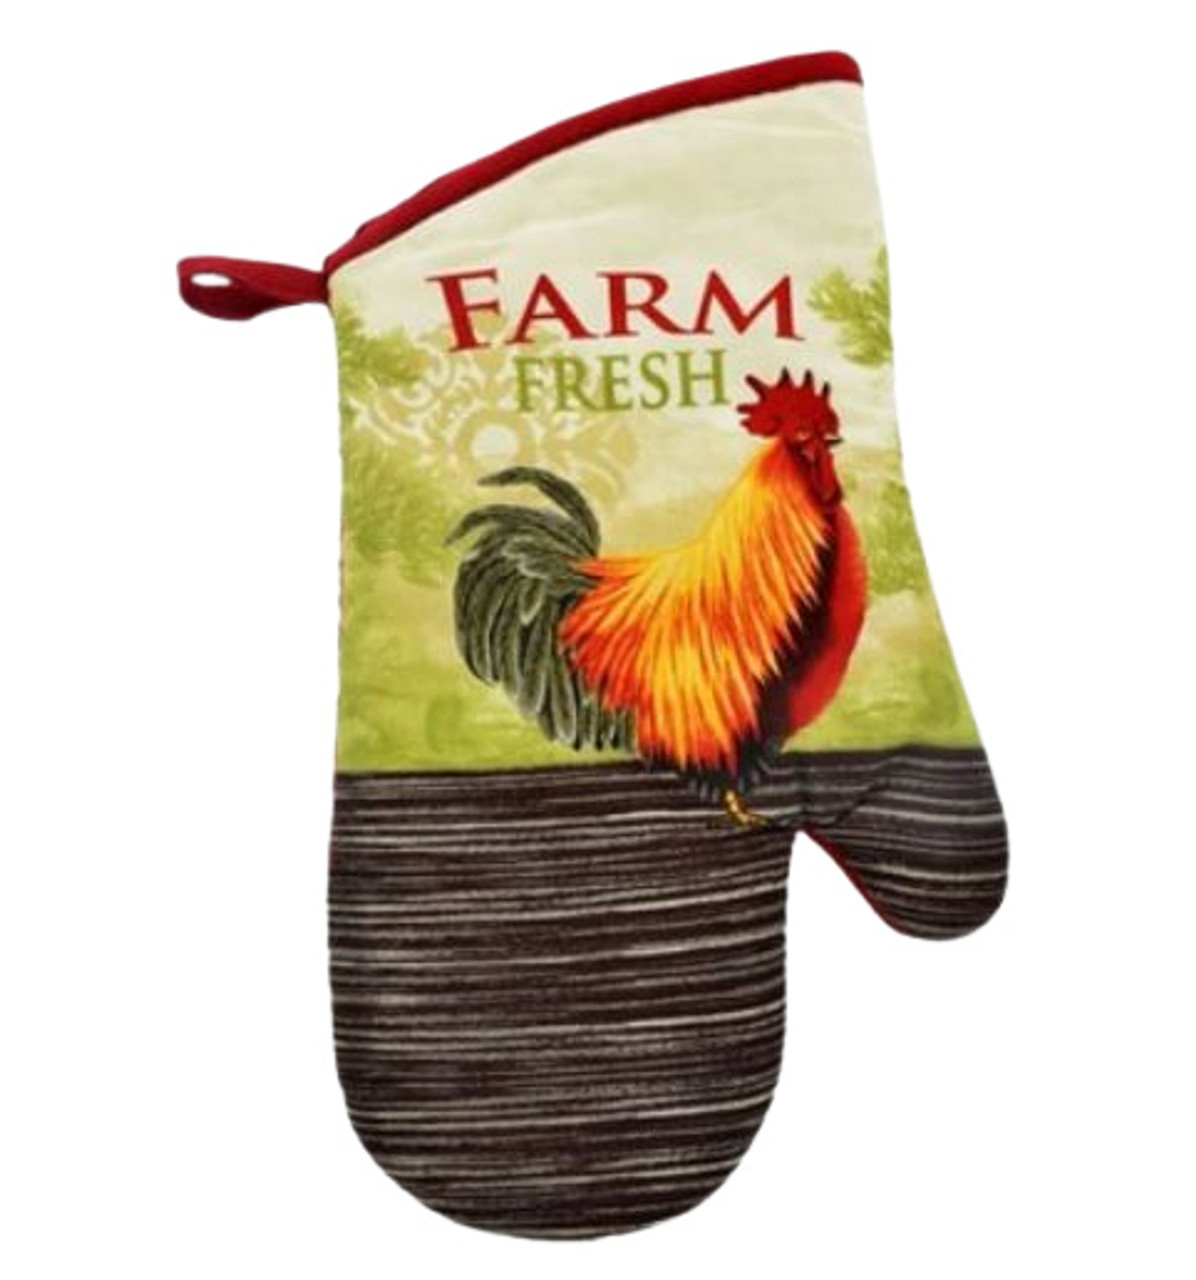 Rooster Trim Oven Mitts, Washable Cute Oven Mitts, Oven Mits/Glove Set, Printed Rooster Heat Resistant Oven Gloves, Hot Mitts for Kitchen, Friendly